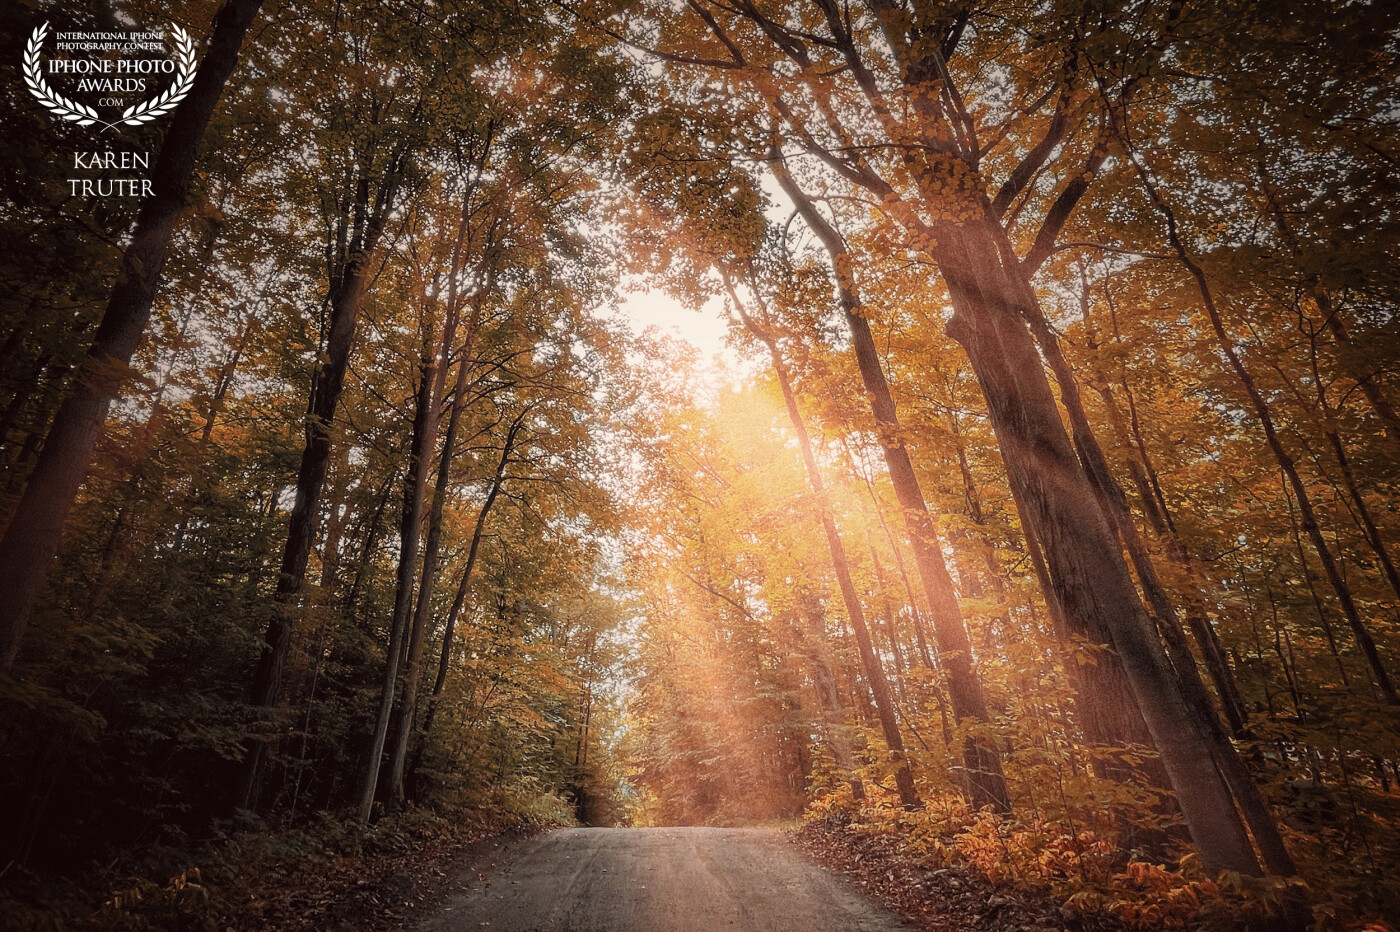 My husband and I took a country drive through the Northumberland Hills, Ontario and I gasped as we ascended the road through the forest. Stopping in the middle of the road, I was able to capture the rays of the autumn sun through the branches.